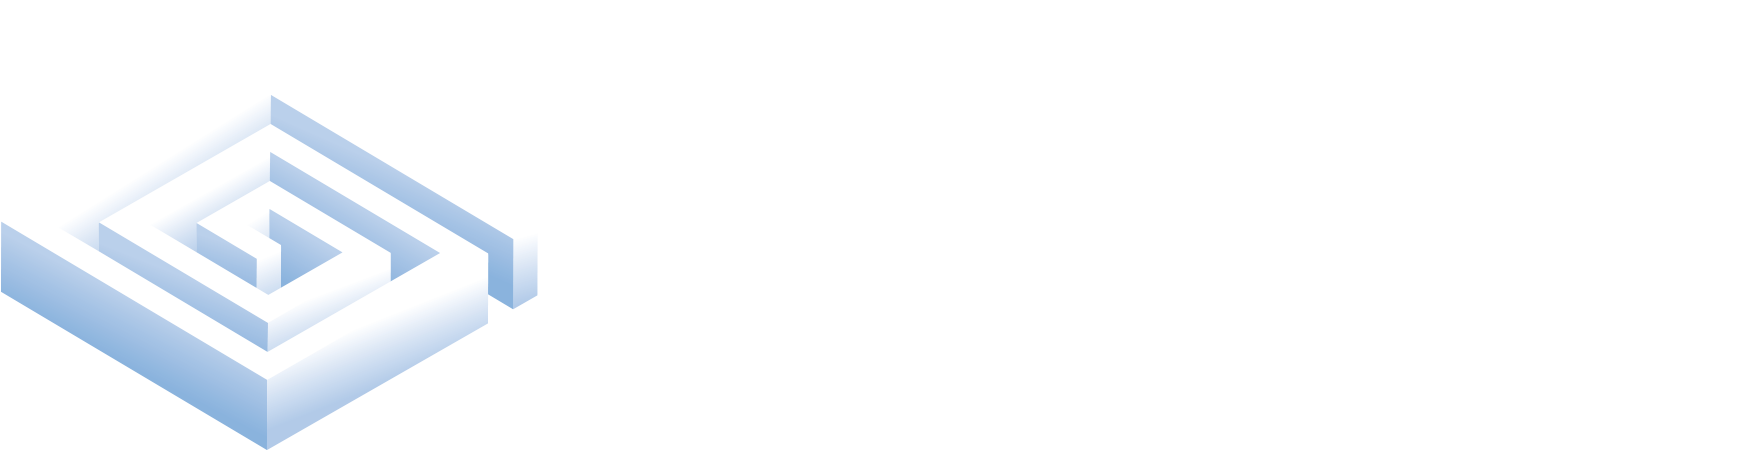 Pathway Financial